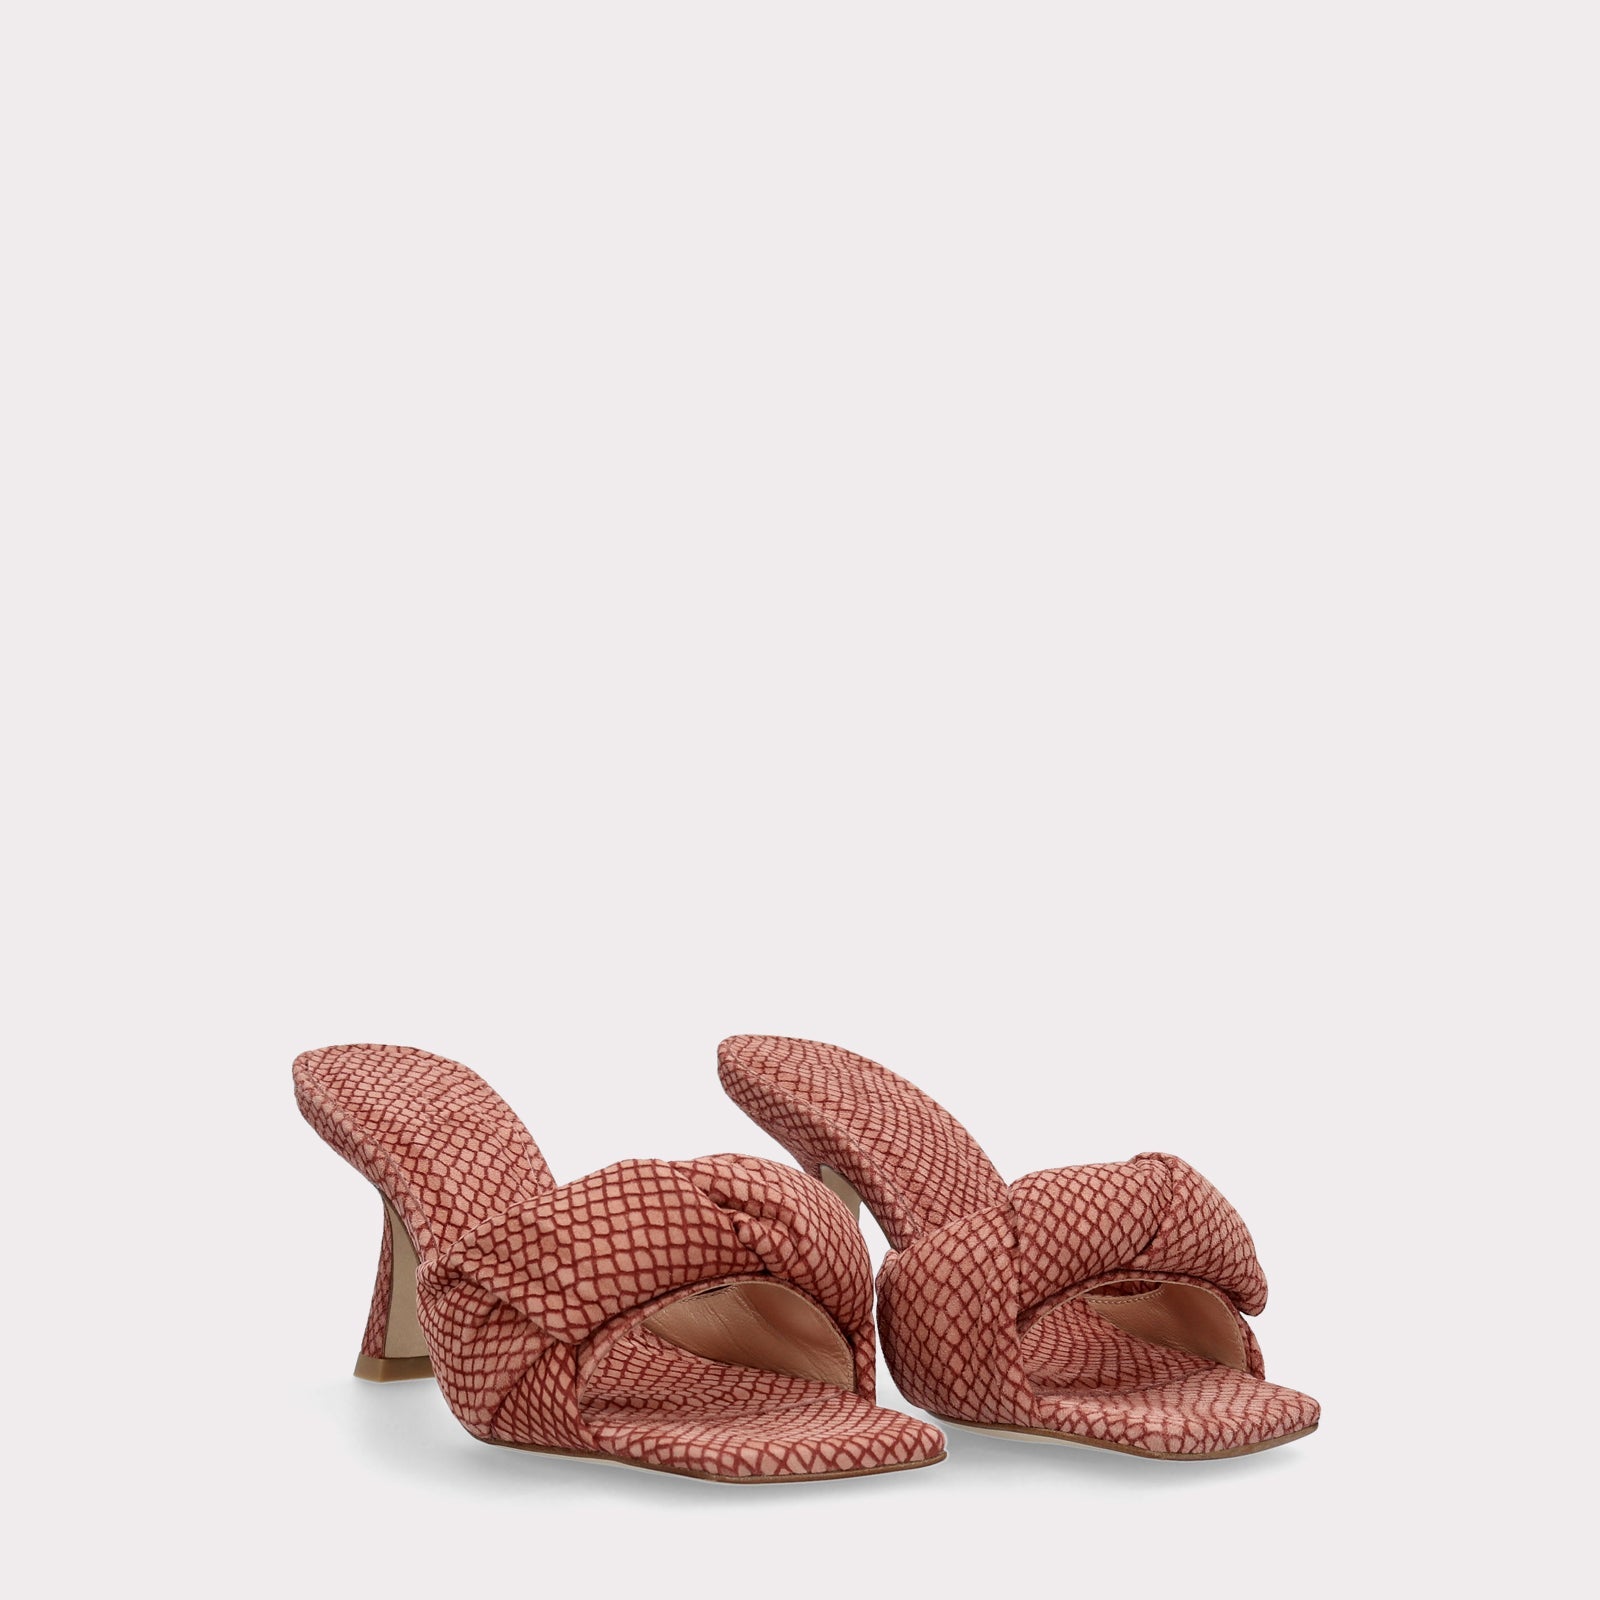 NIA BROWN MINI VIPER EMBOSSED SUEDE LEATHER MULES